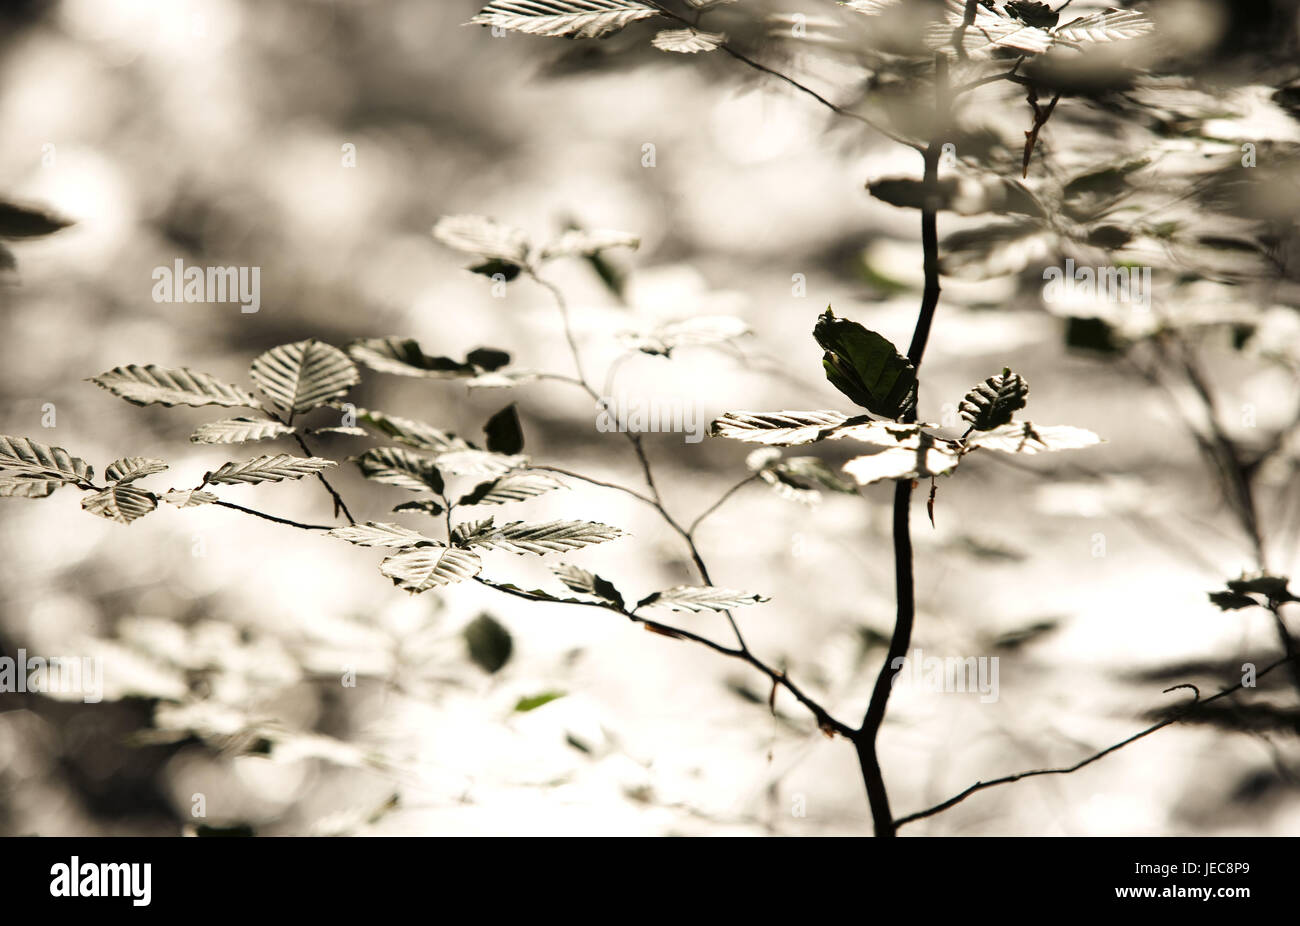 Tree, book, detail, branches, plants, foliage woods, broad-leaved tree, branches, leaves, booking leaves, light, shade, nobody, silence, rest, nature, colour tuning, Stock Photo